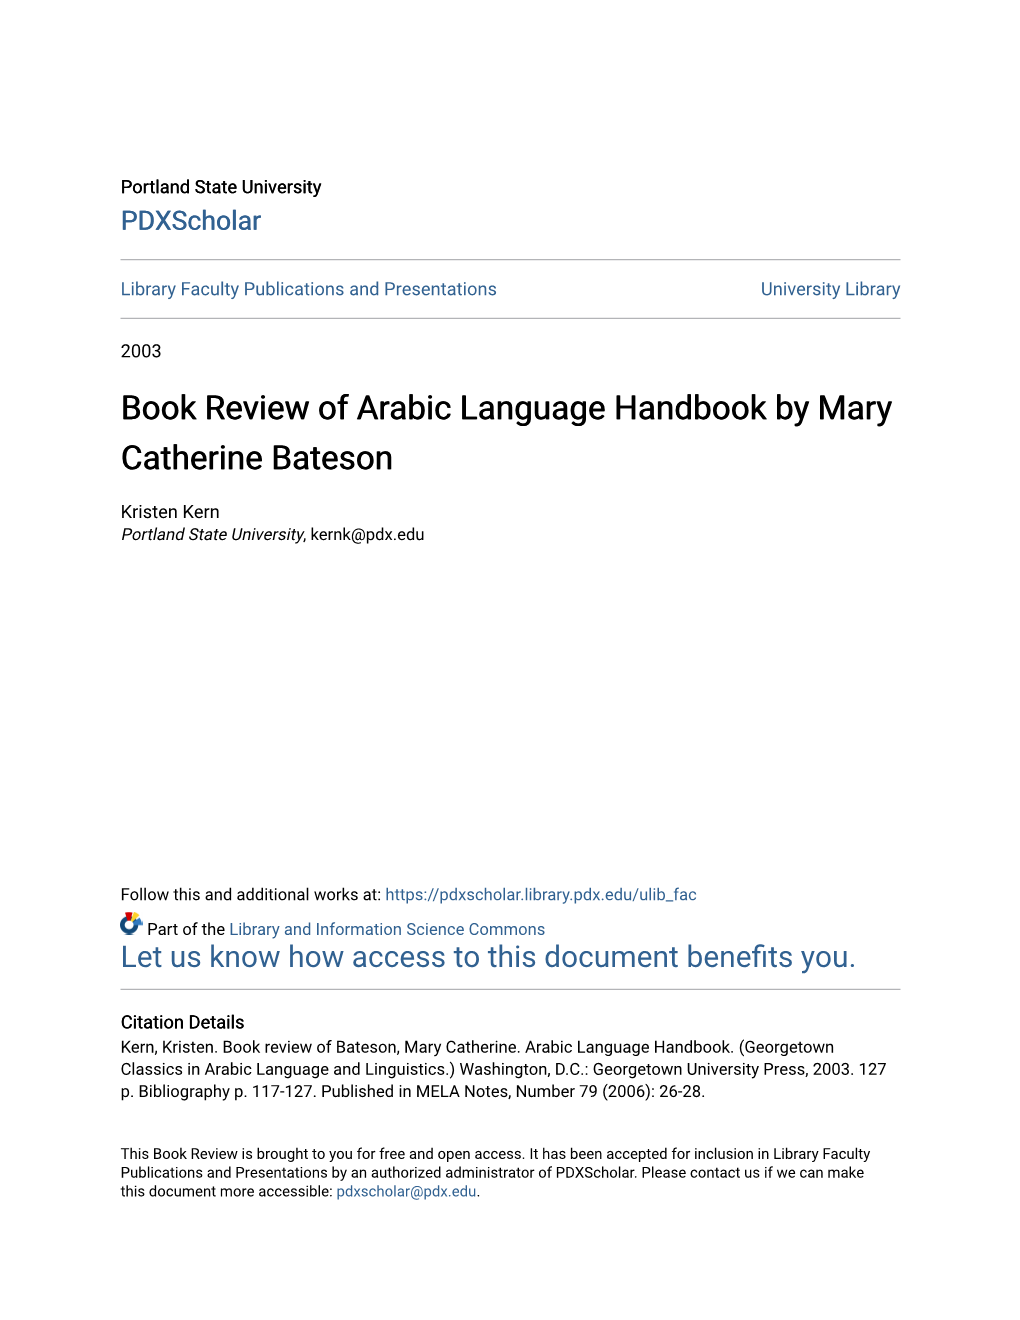 Book Review of Arabic Language Handbook by Mary Catherine Bateson